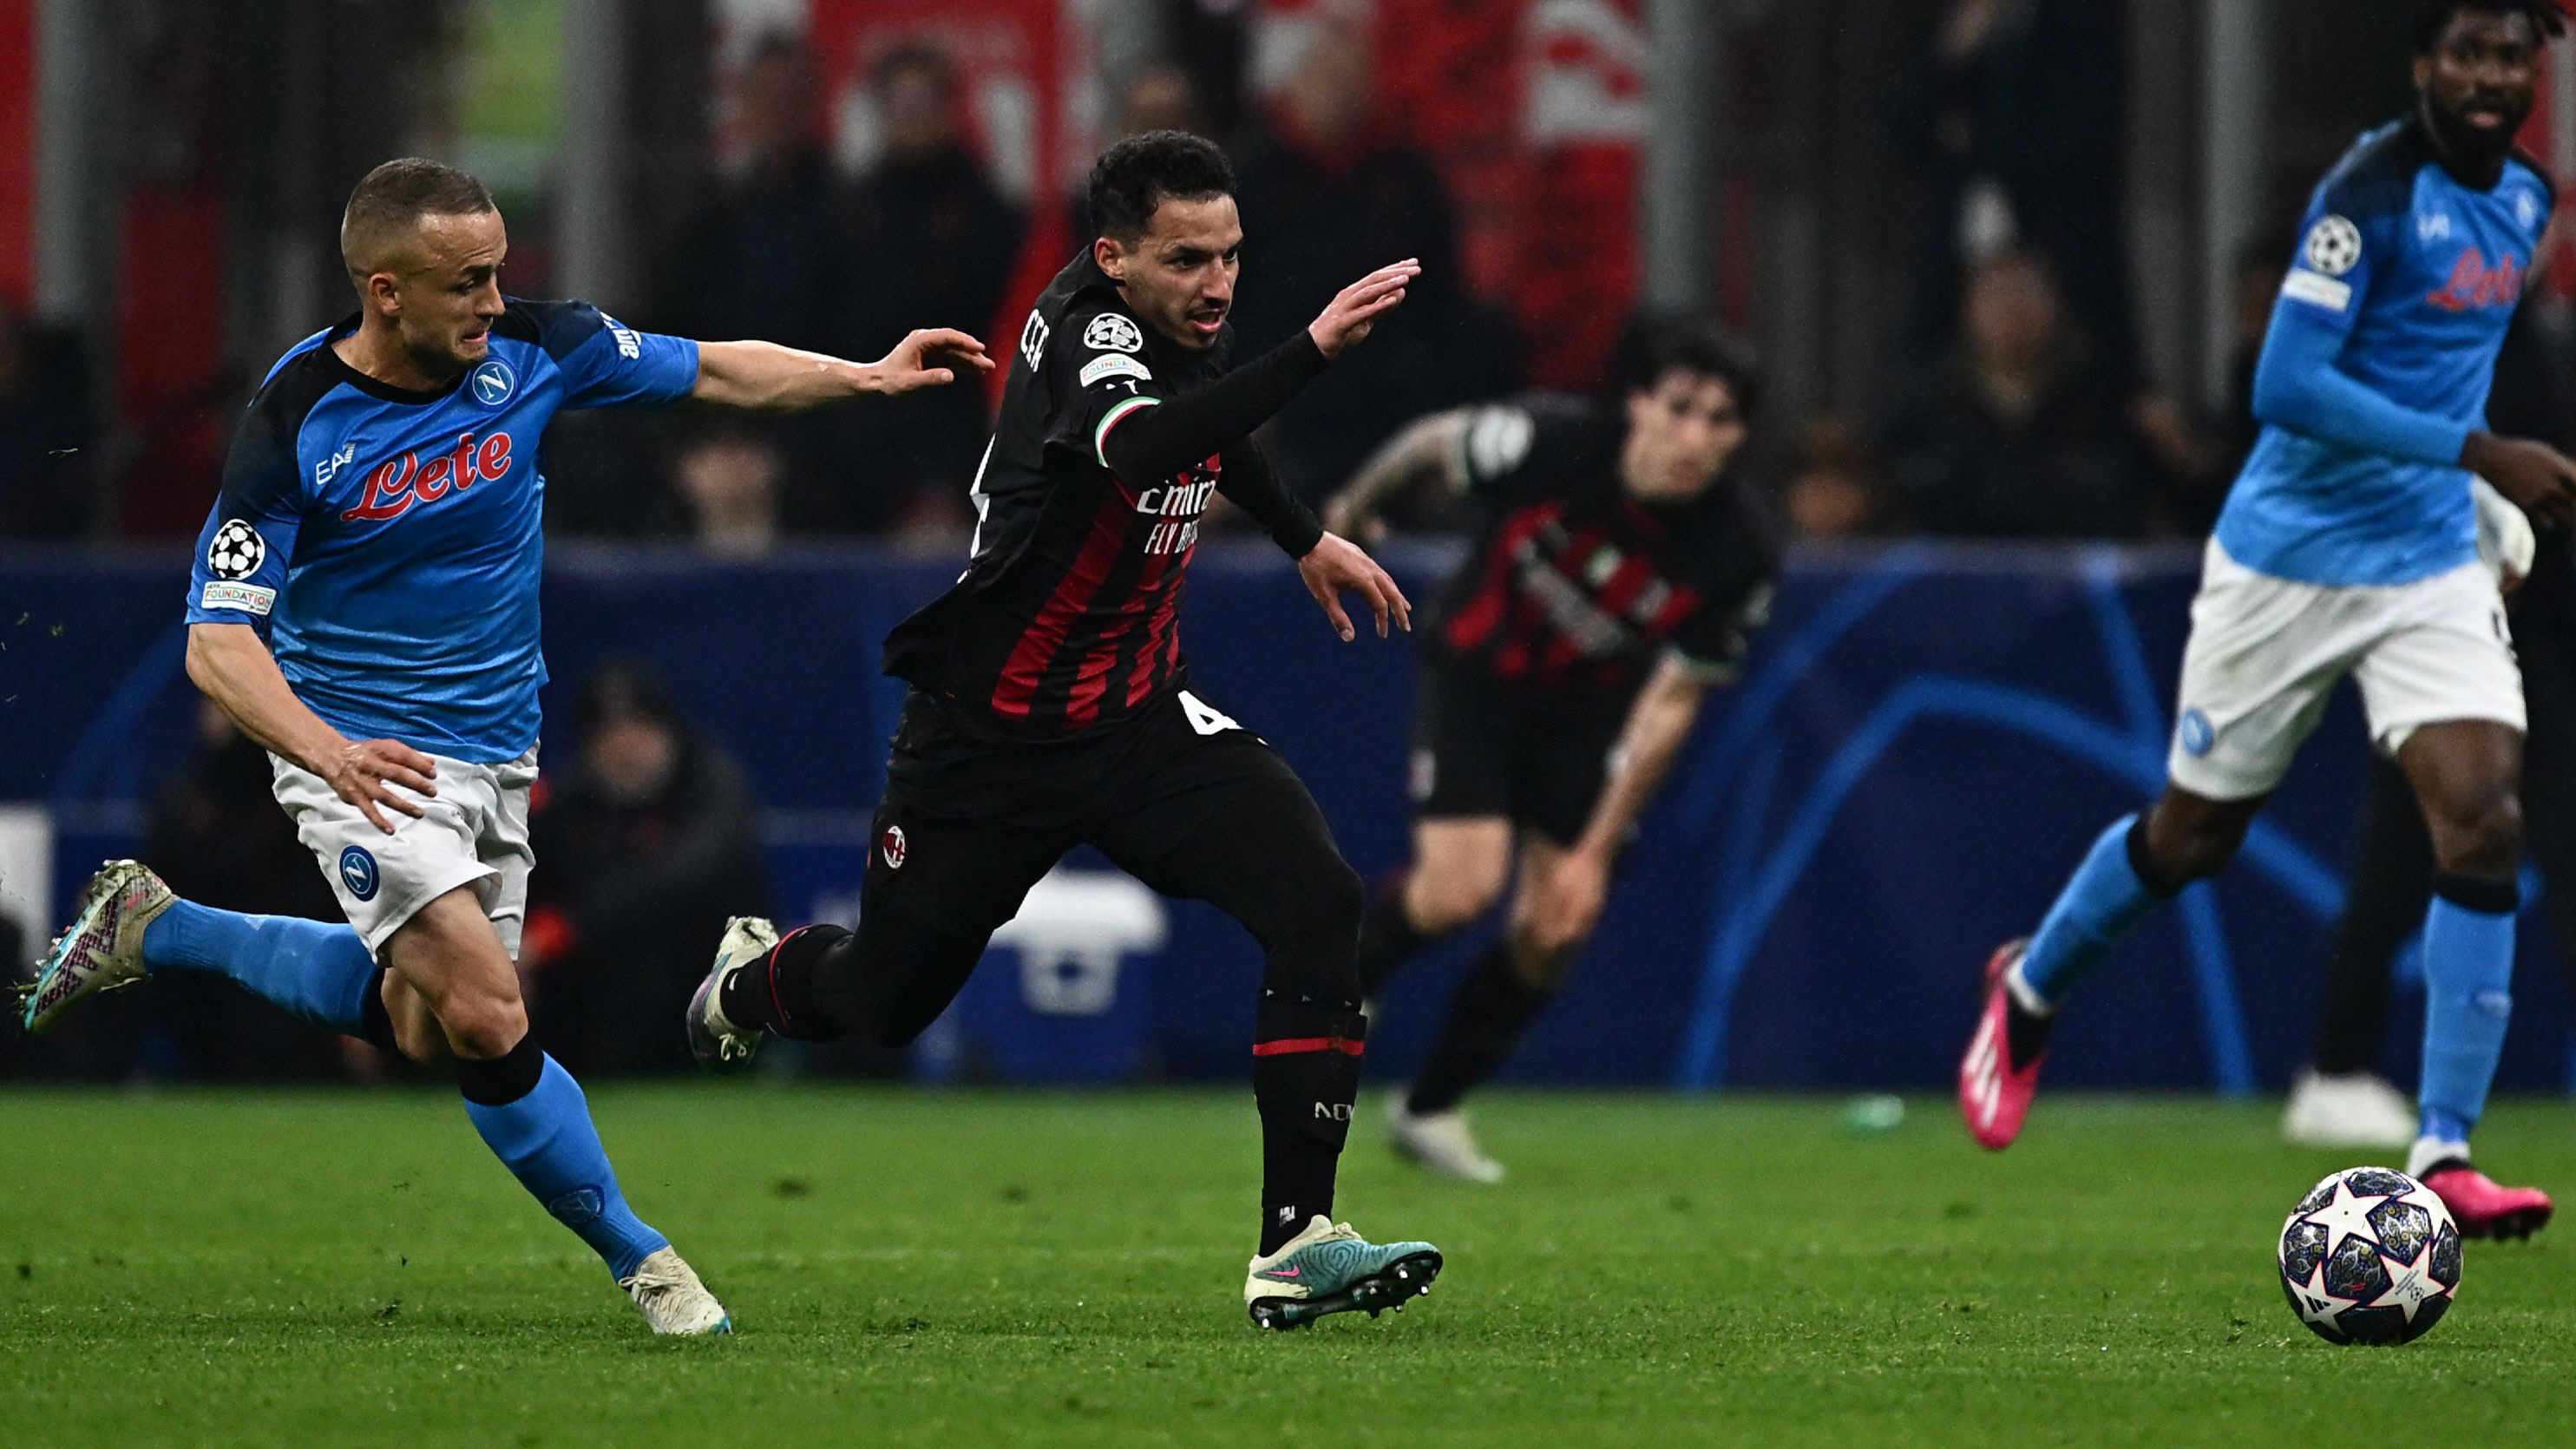 Photo of Milan draws first blood in CL derby with Napoli